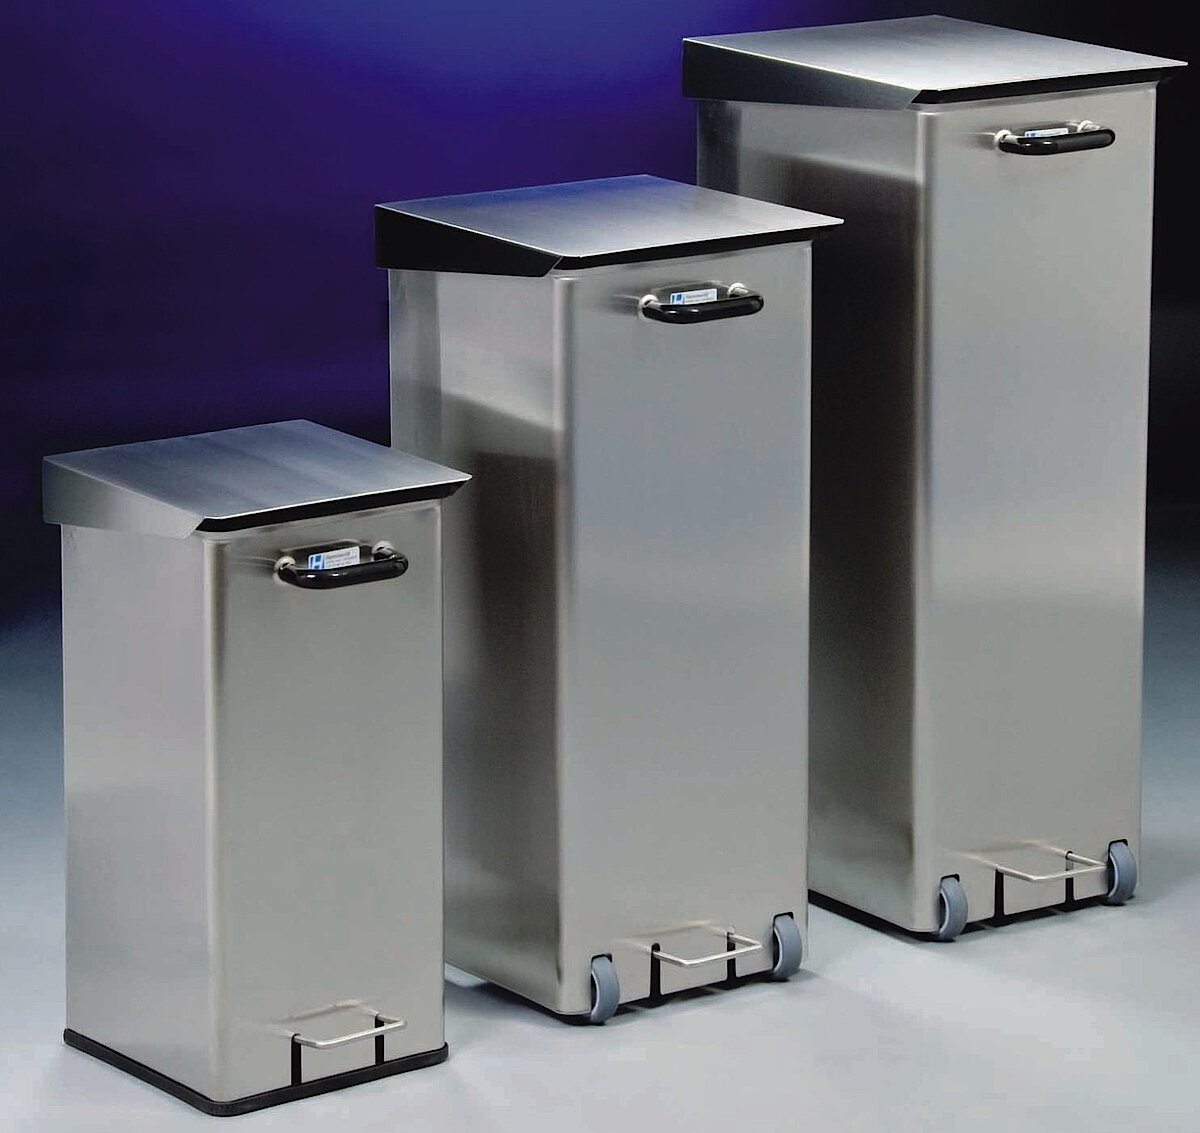 Cleanroom waste bin made of stainless steel with castors